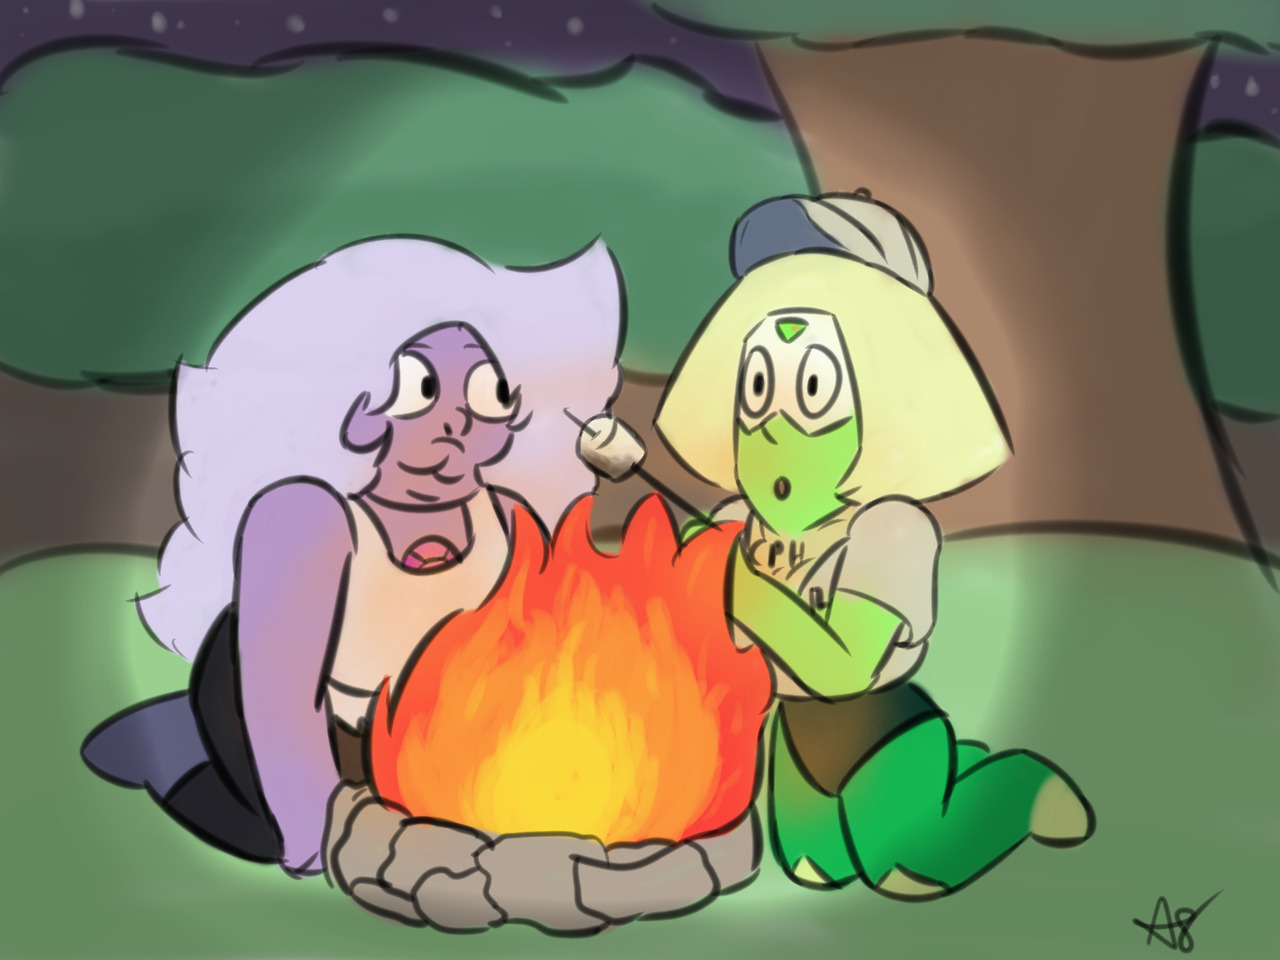 Peridot’s decked out in Camp Pining Hearts gear, learning the ways of toasting marshmallows for her hungry girlfriend! Amedot Bomb 8, Day 2 (Camping)